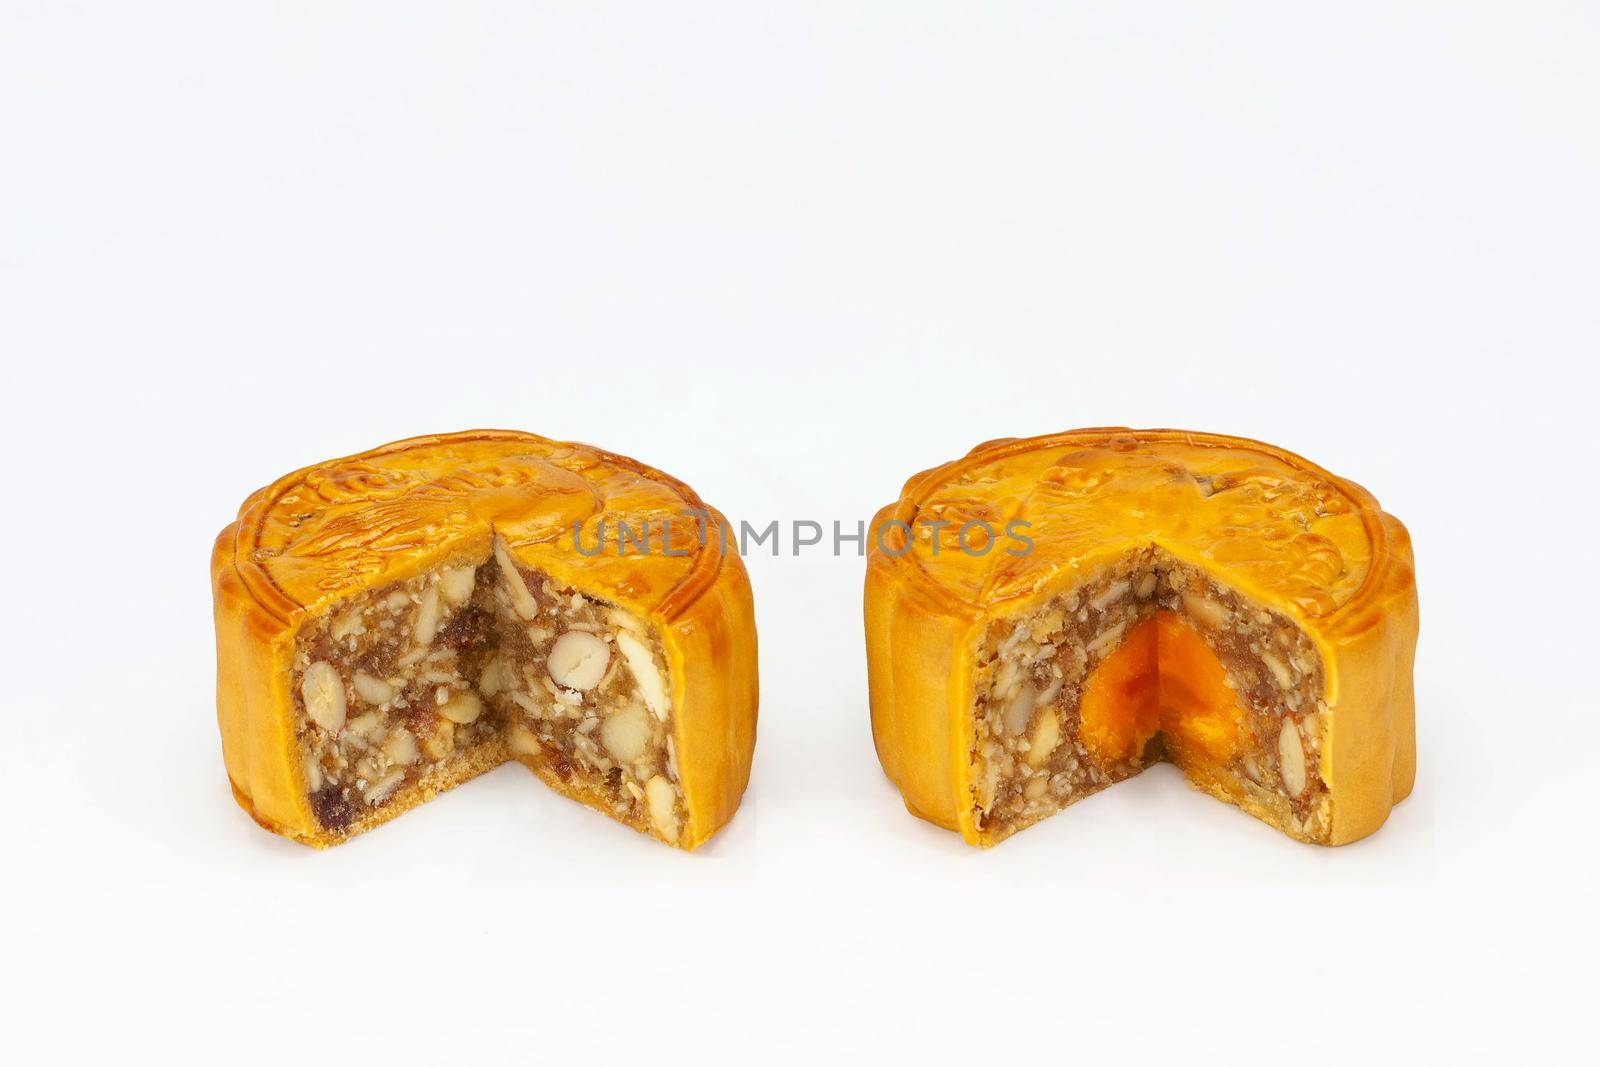 Wuren (Mixed Nuts) and  Salted Egg Yolk filling Mooncake on white background